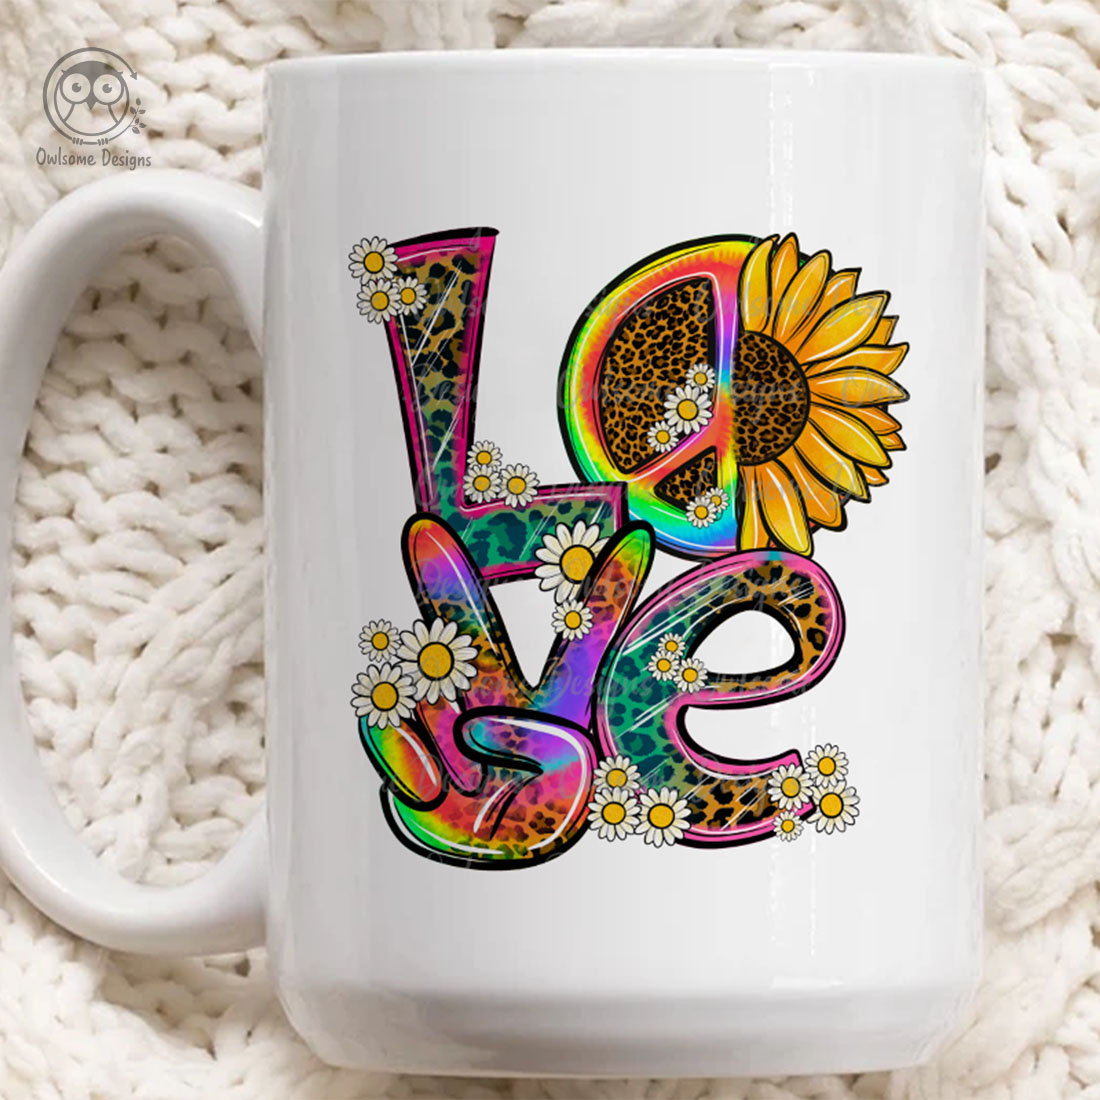 Image of a cup with a beautiful inscription love in the style of a hippie.